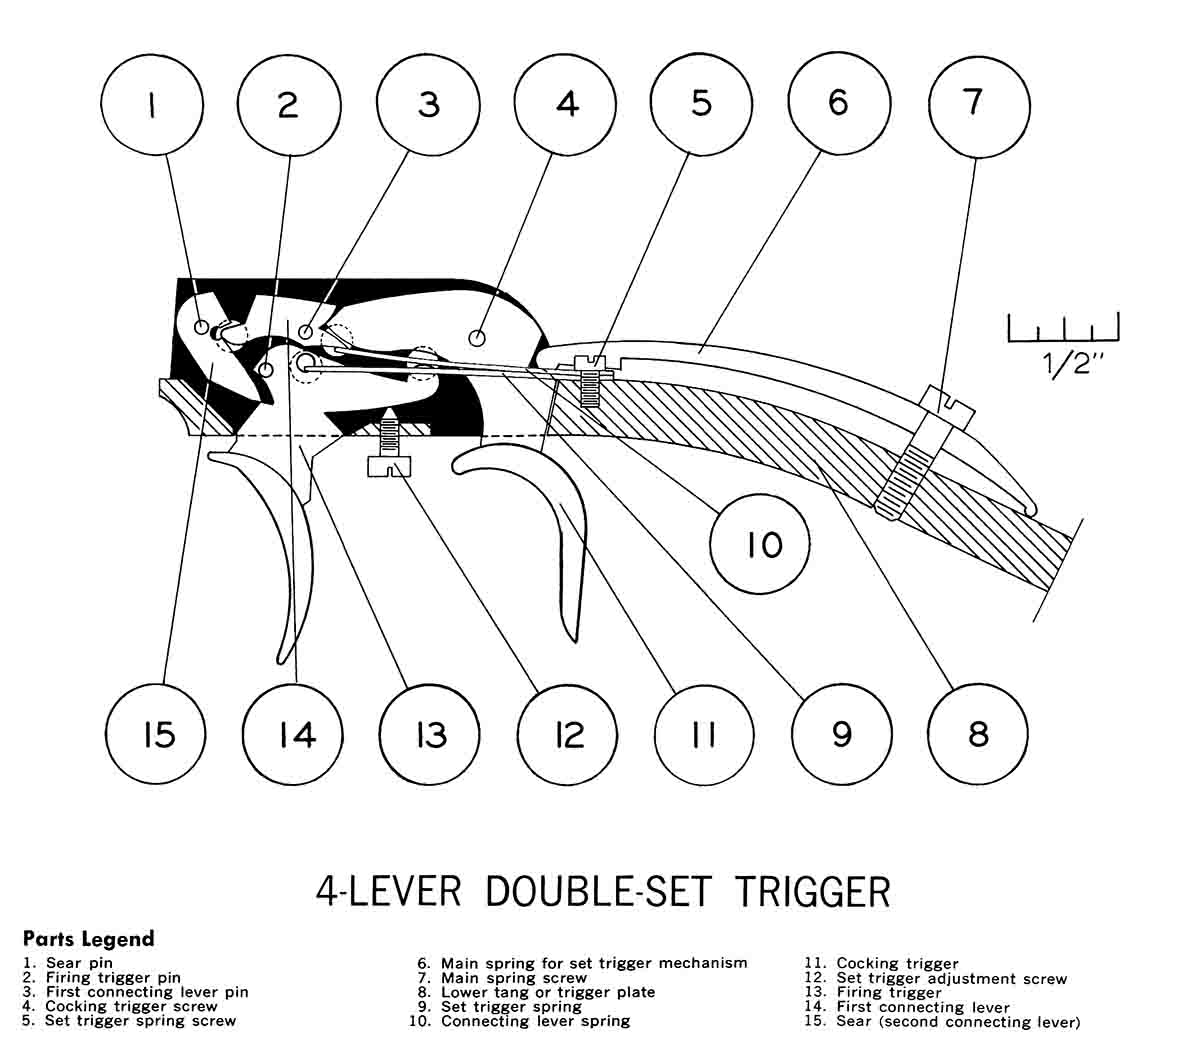 Four-lever set triggers that provide for exceptional trigger release.